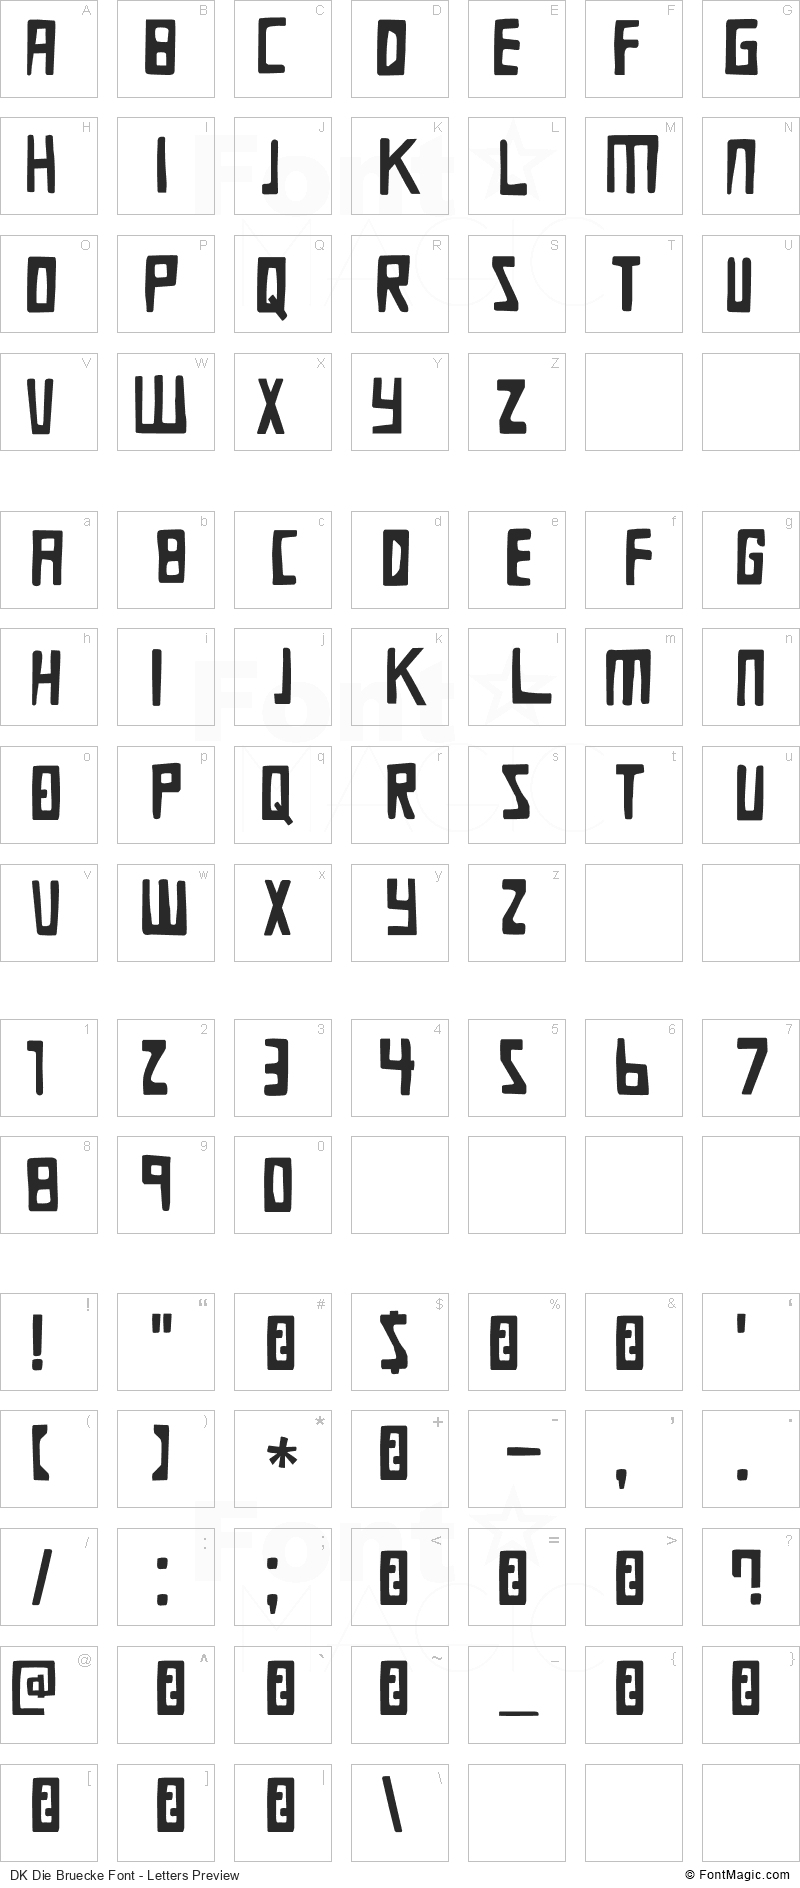 DK Die Bruecke Font - All Latters Preview Chart